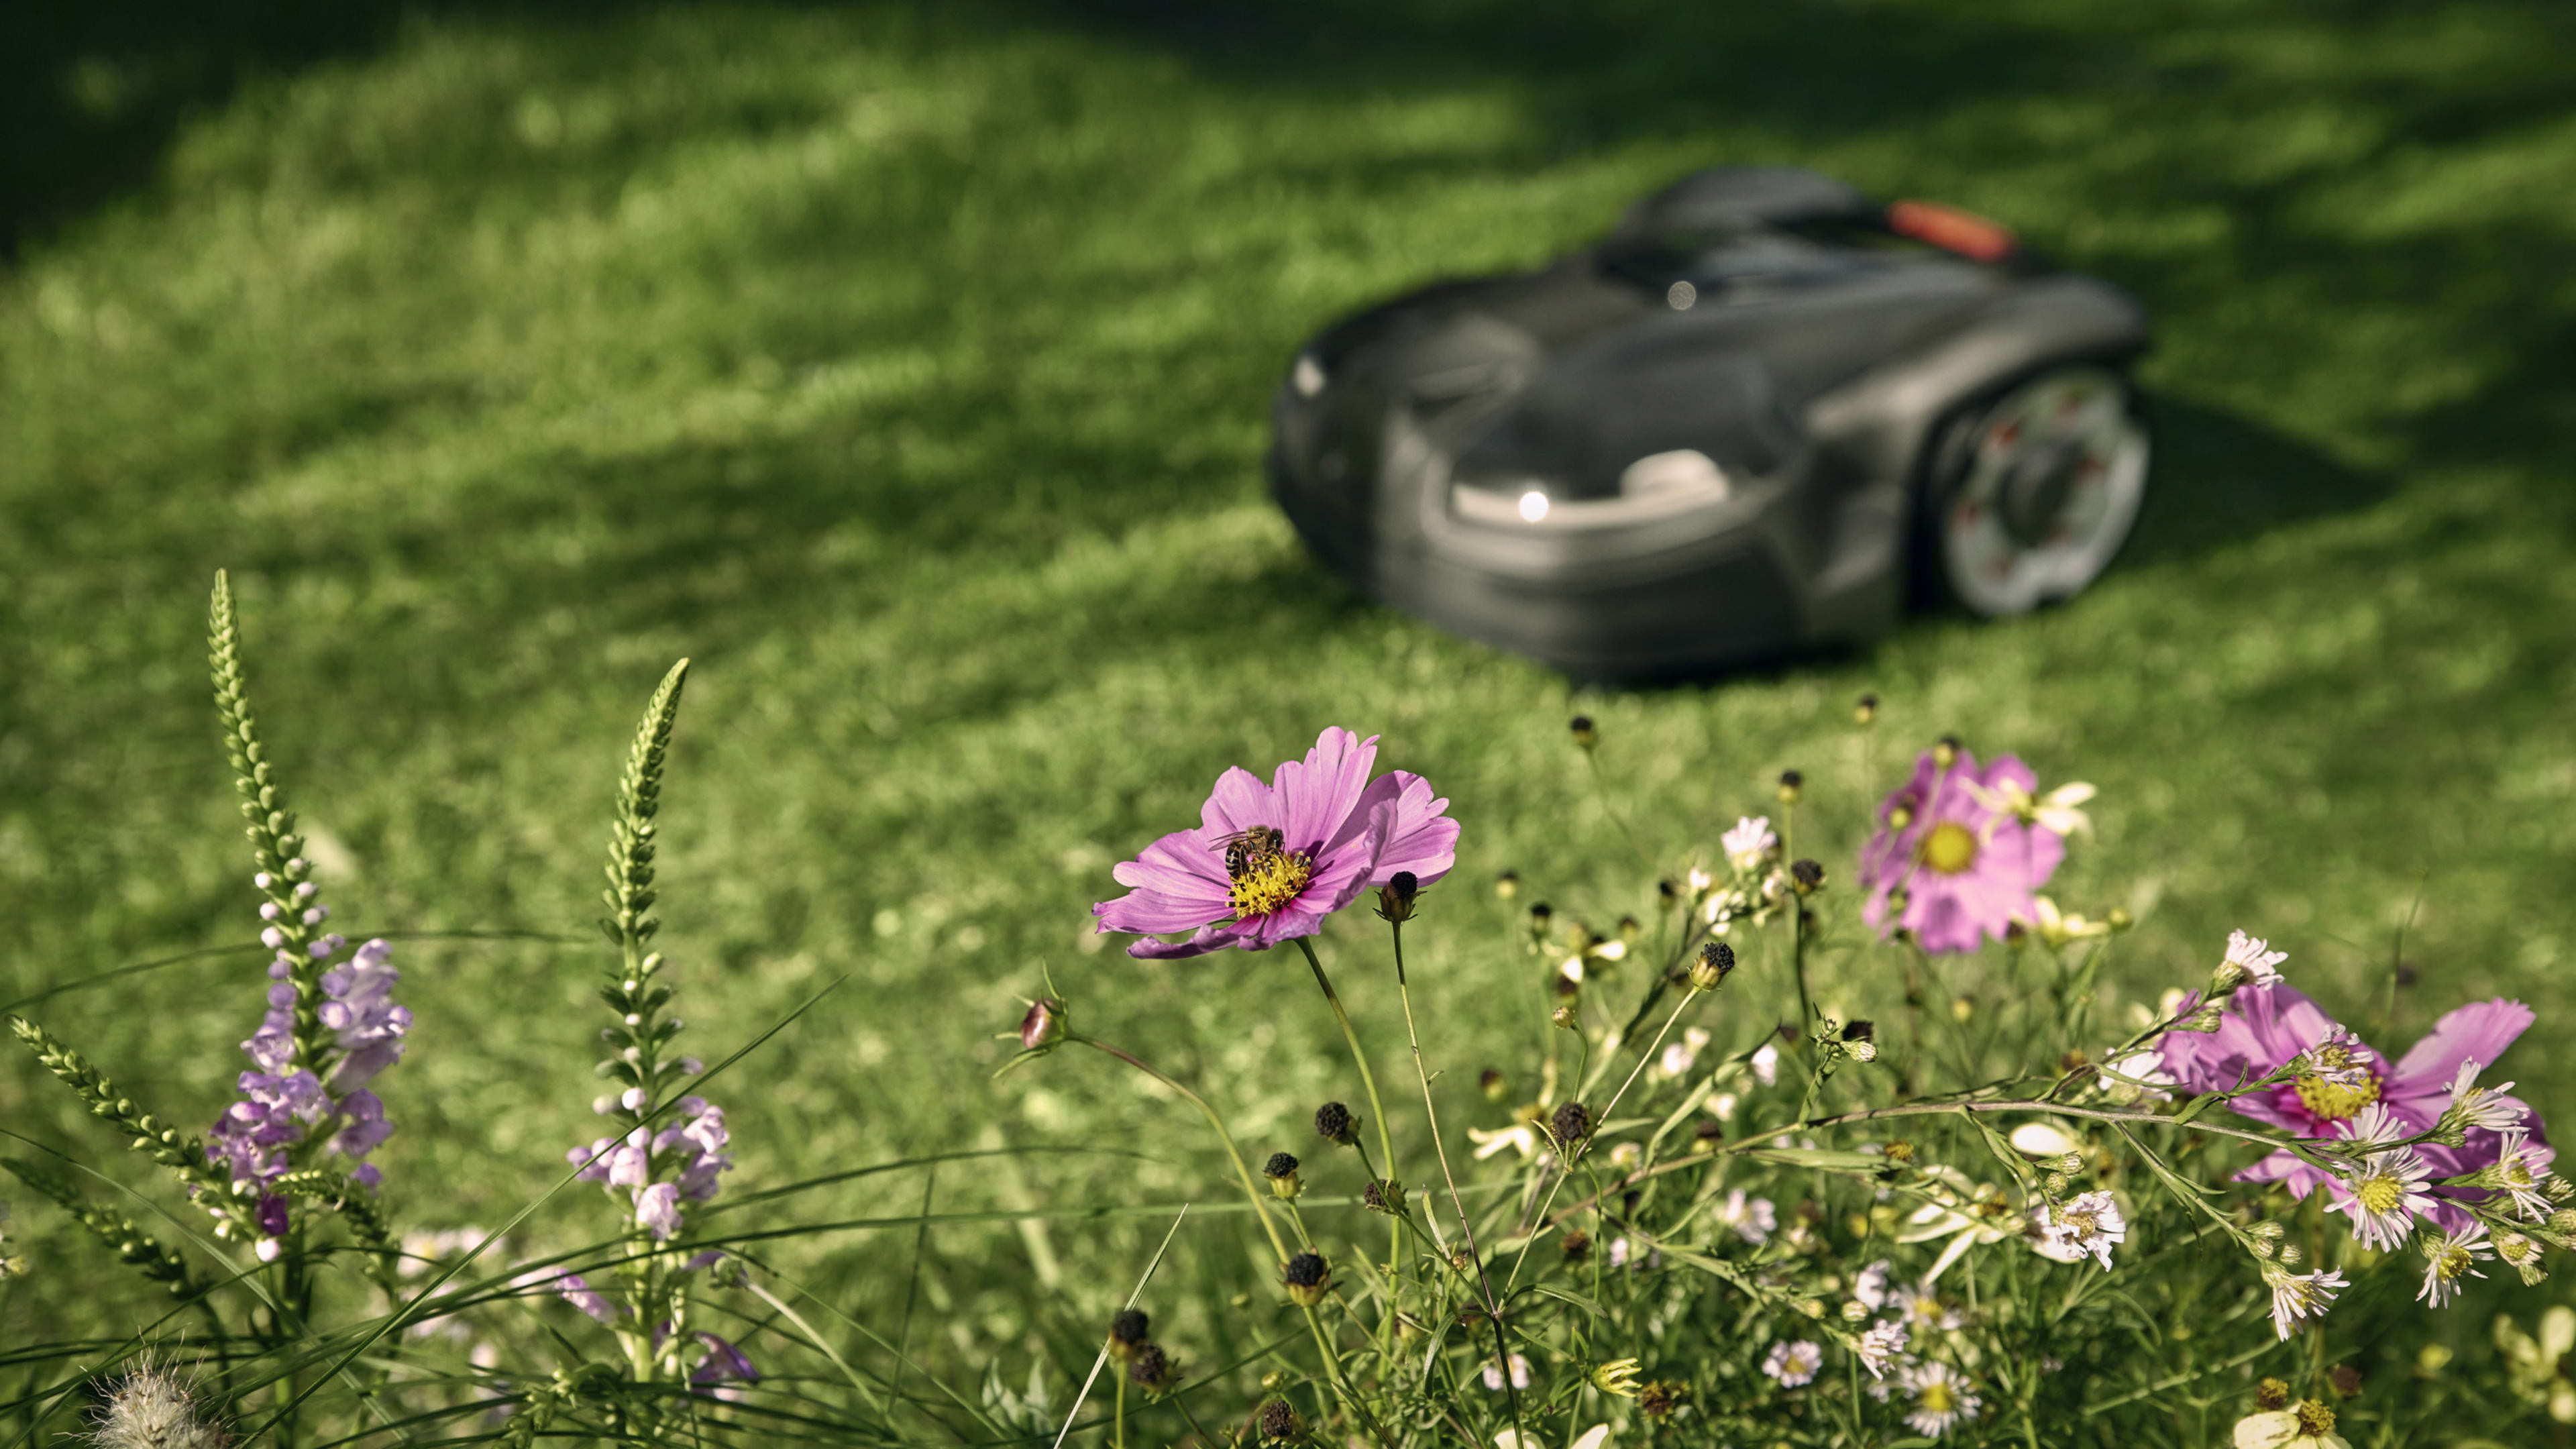 This robot lawnmower wants to help return your yard to nature